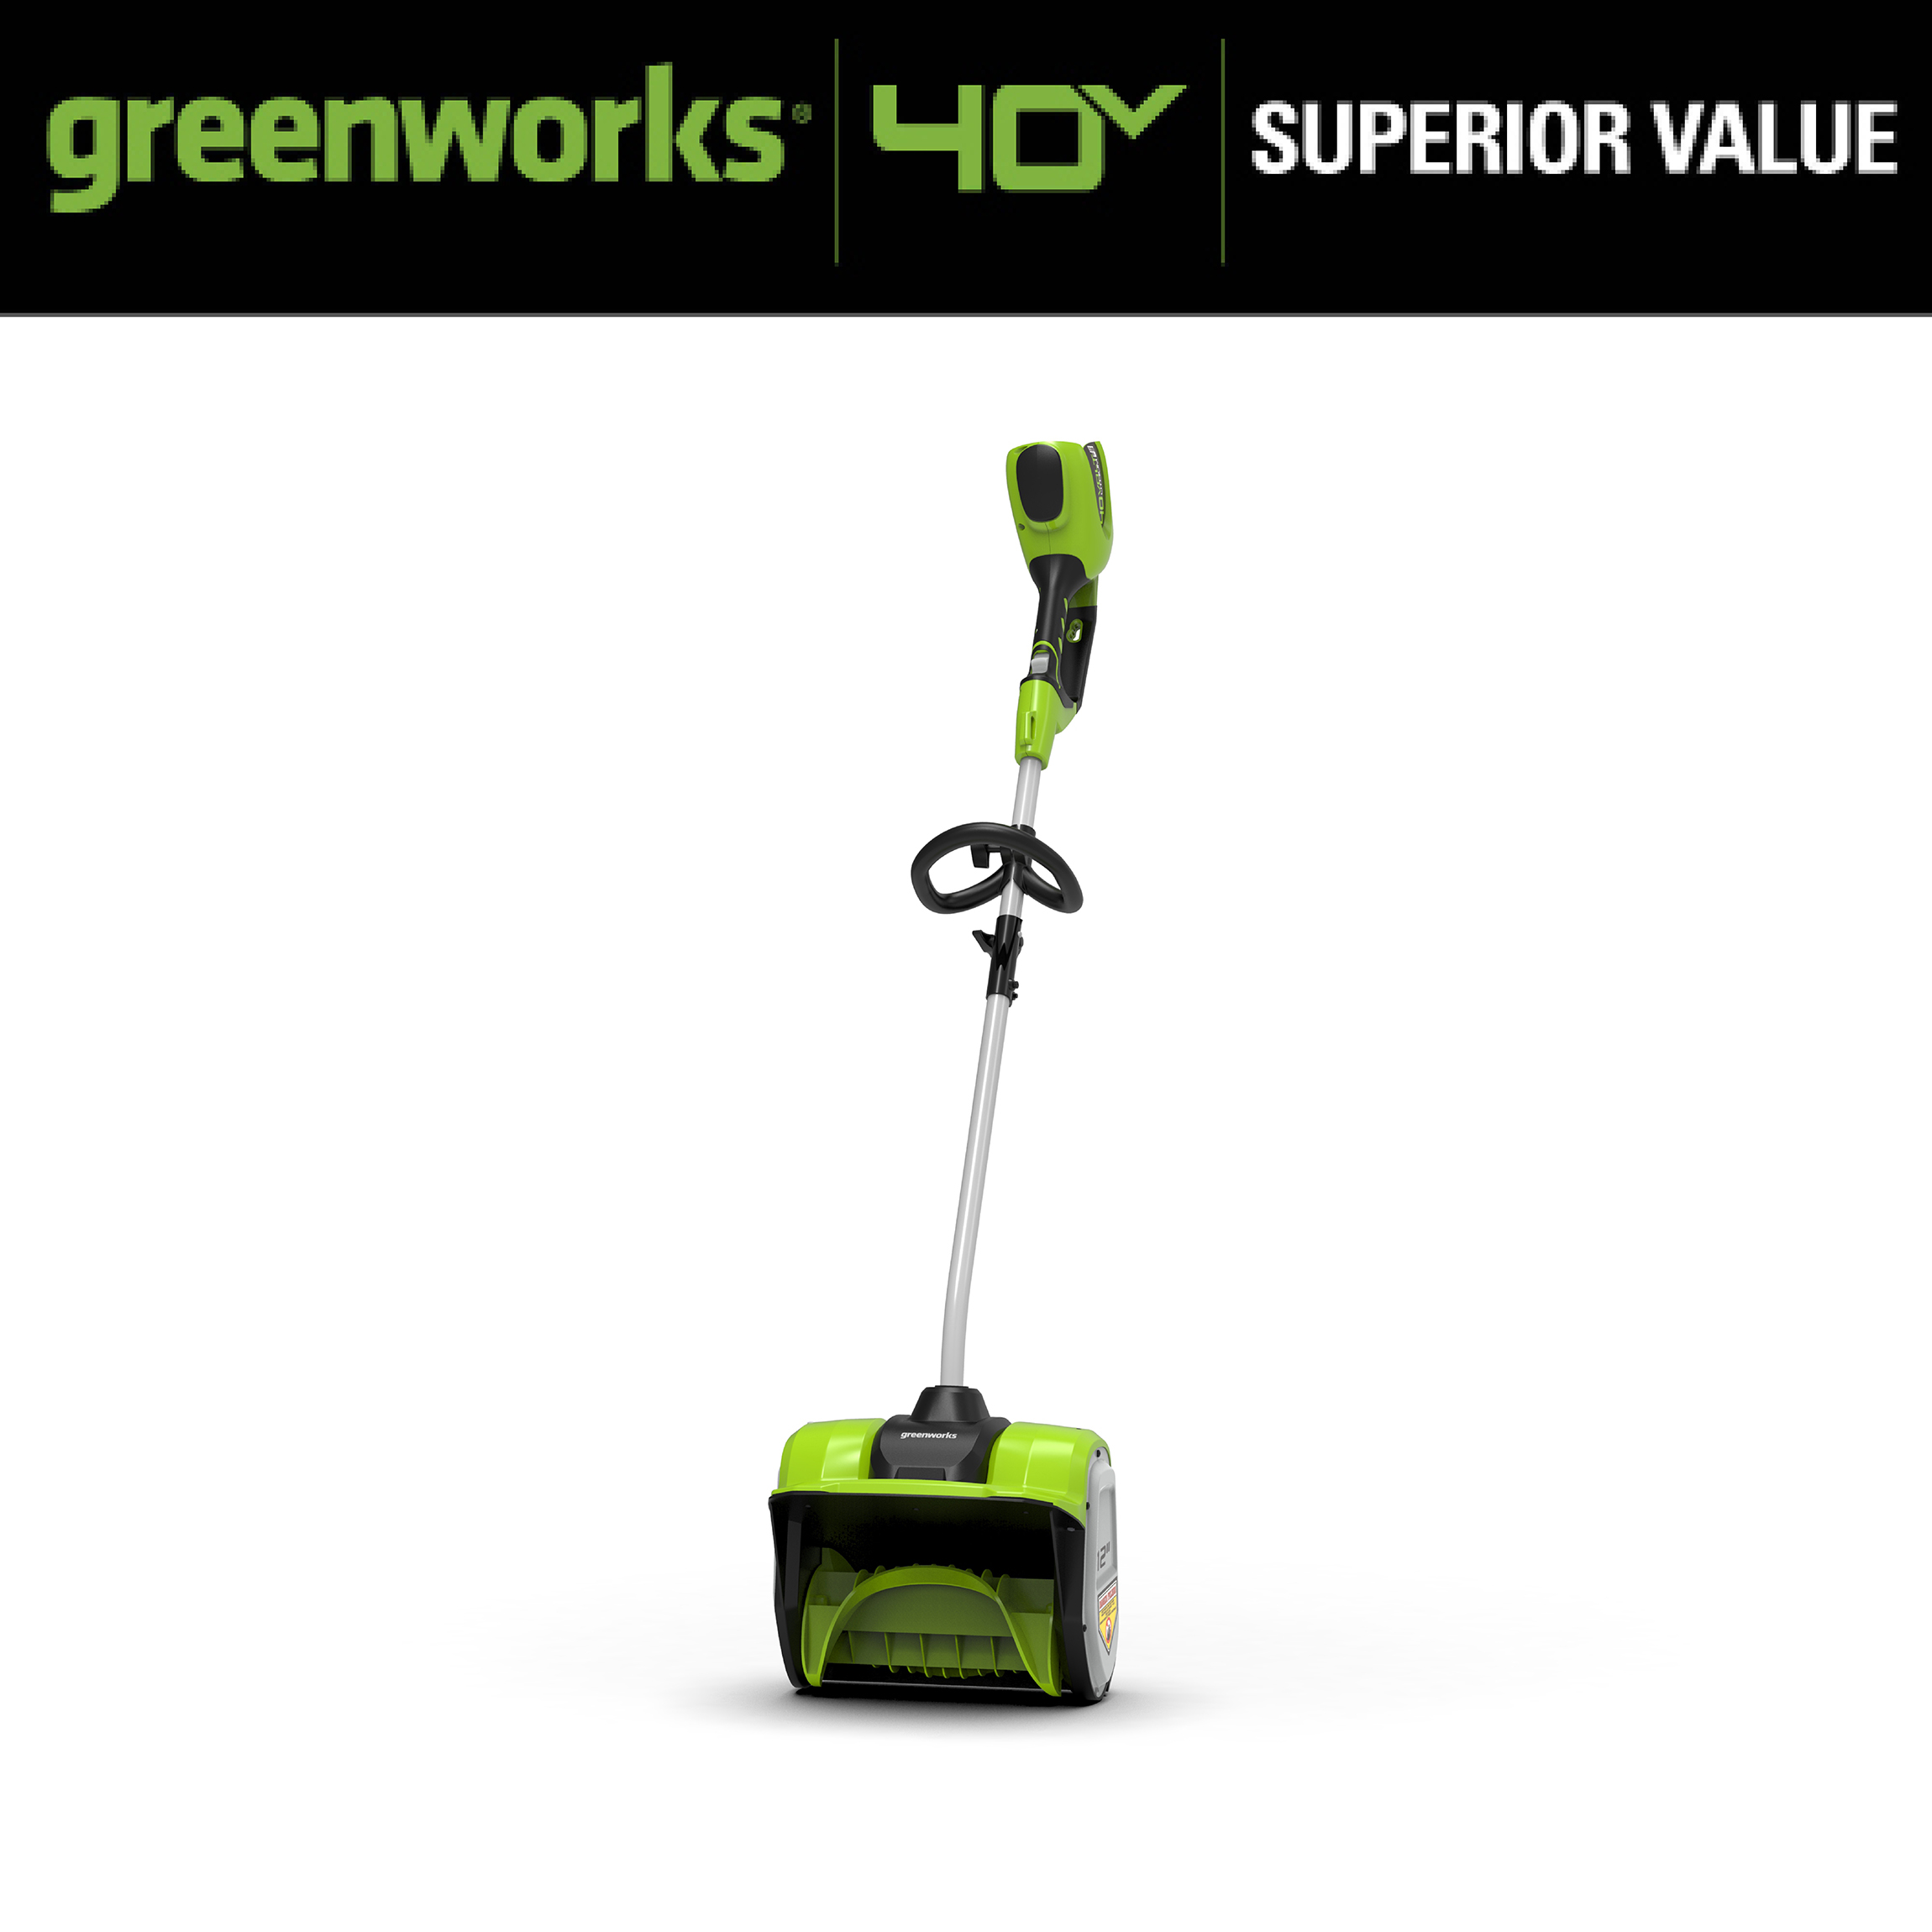 Greenworks 12" 40V Single-Stage Battery Powered Push Snow Blower - image 3 of 8